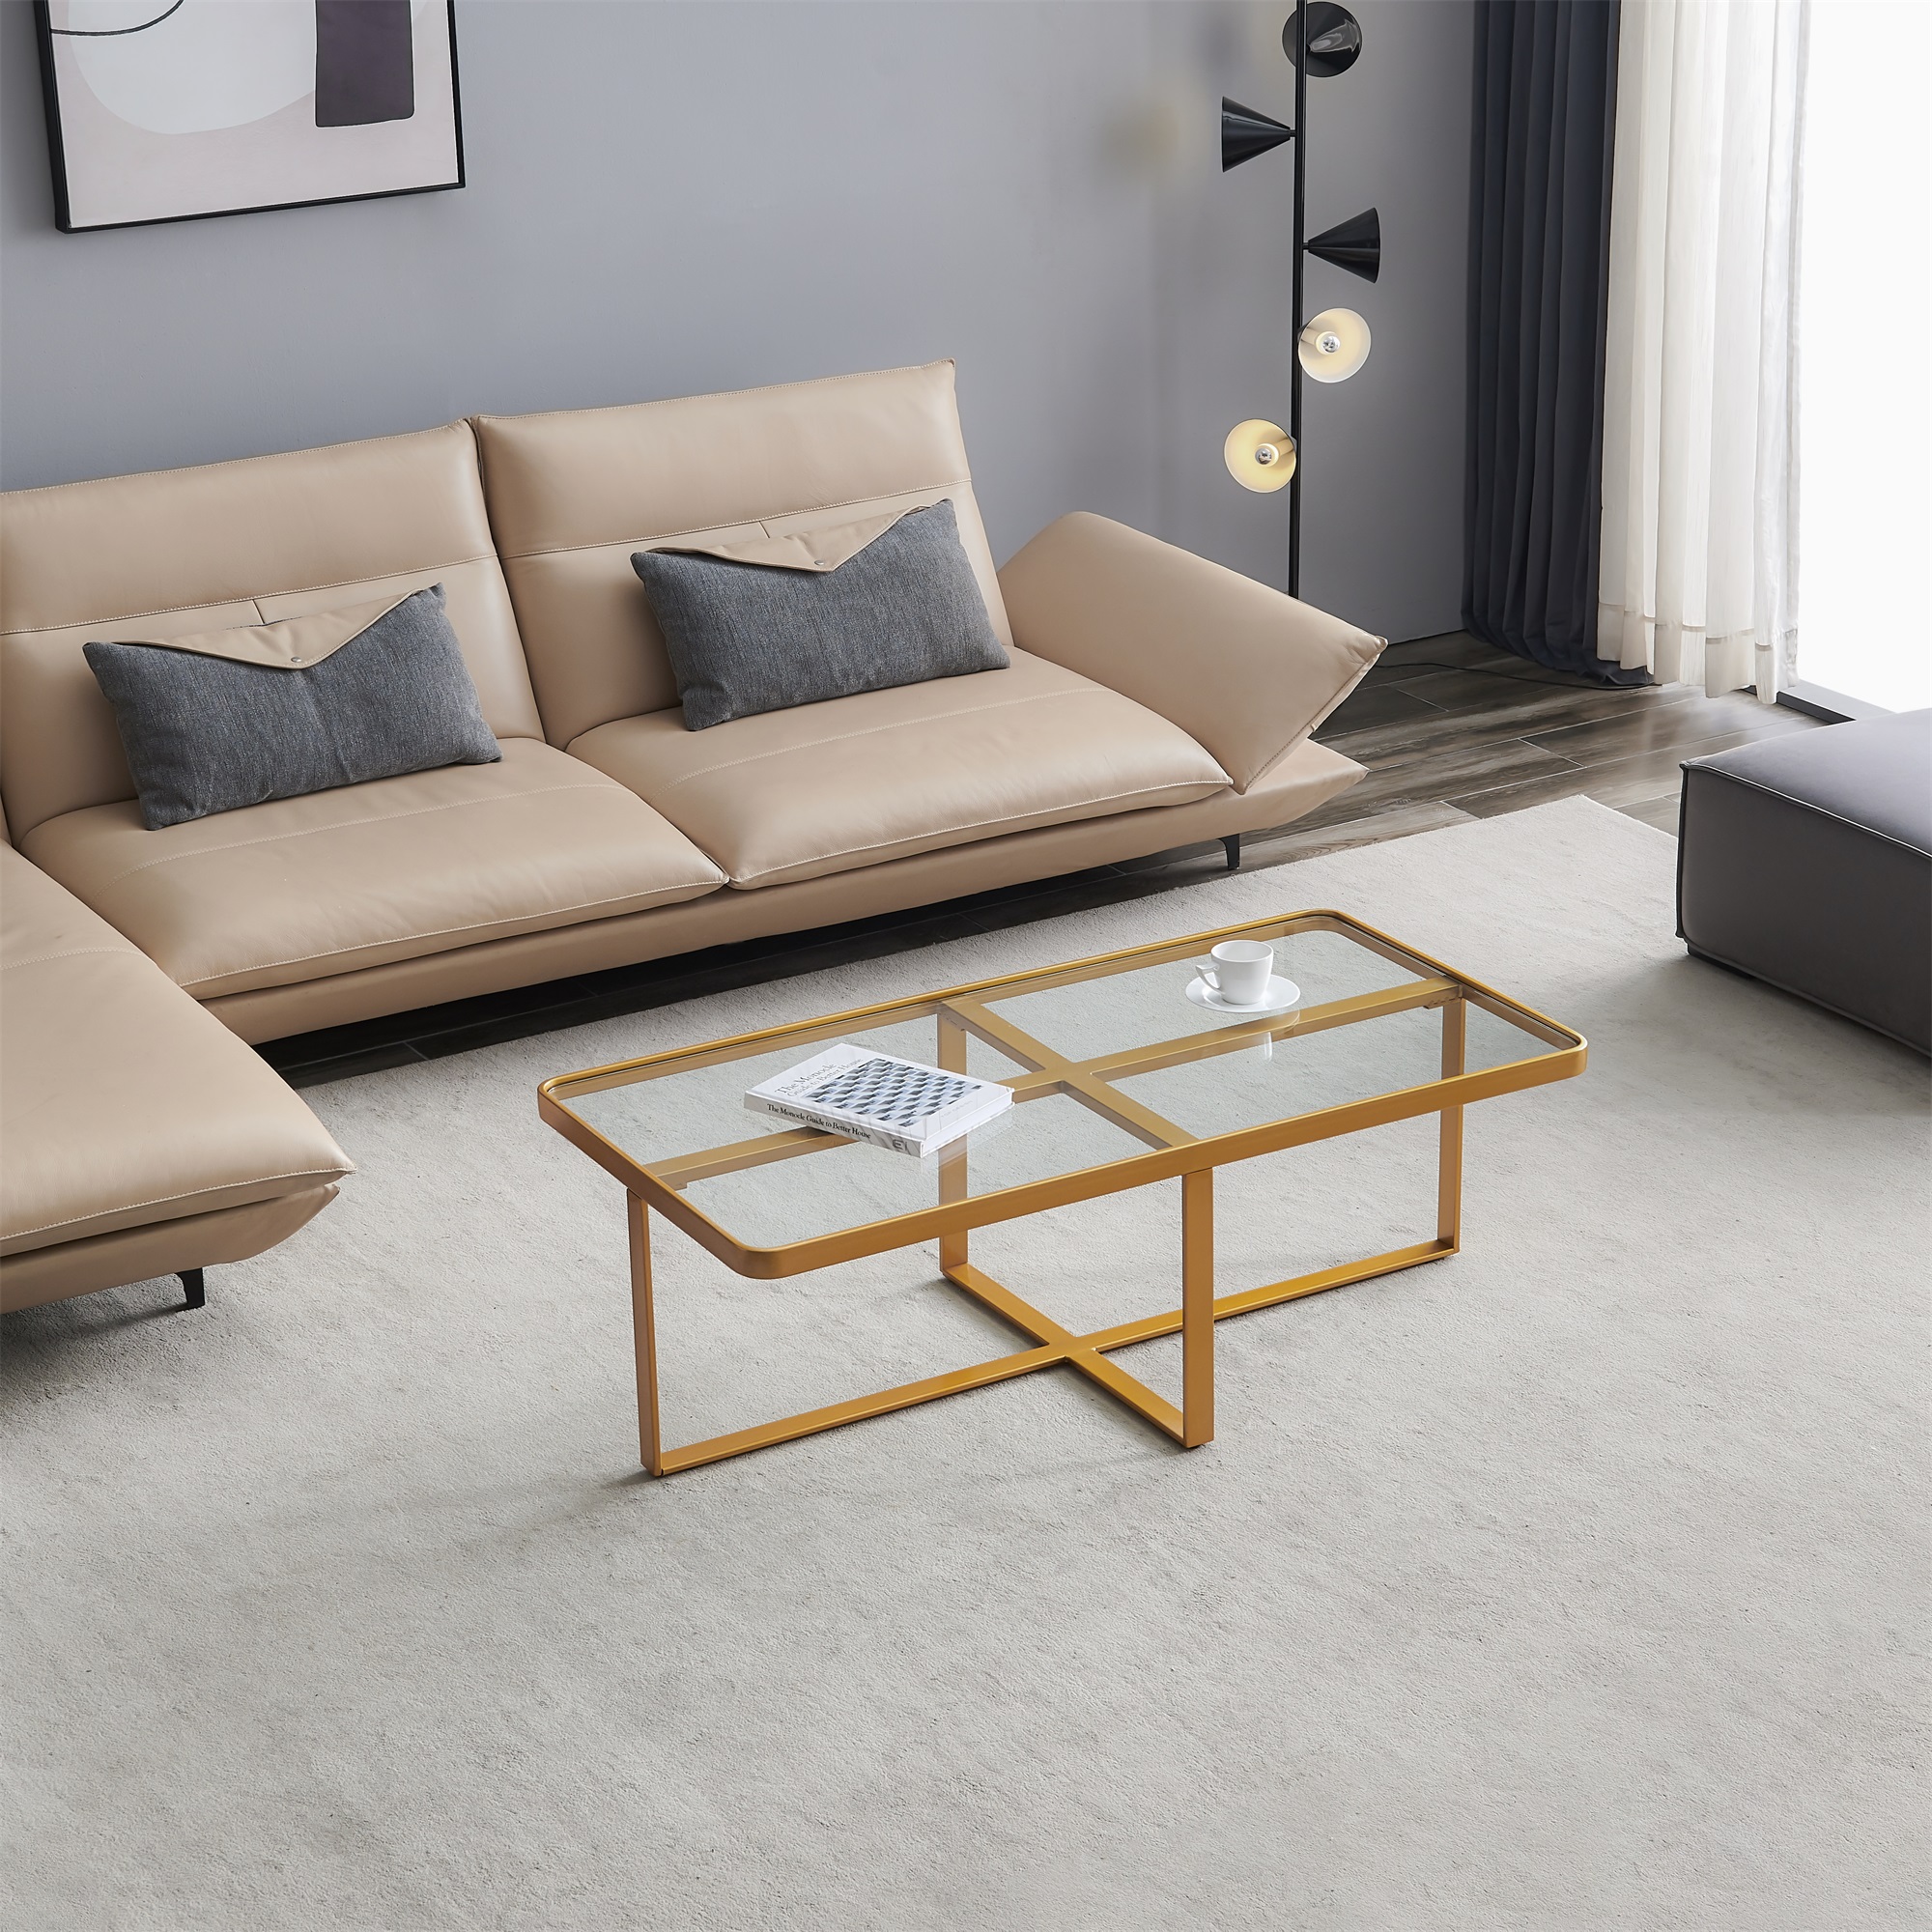 Minimalism rectangle coffee table,Golden metal frame with tempered glass tabletop-CASAINC